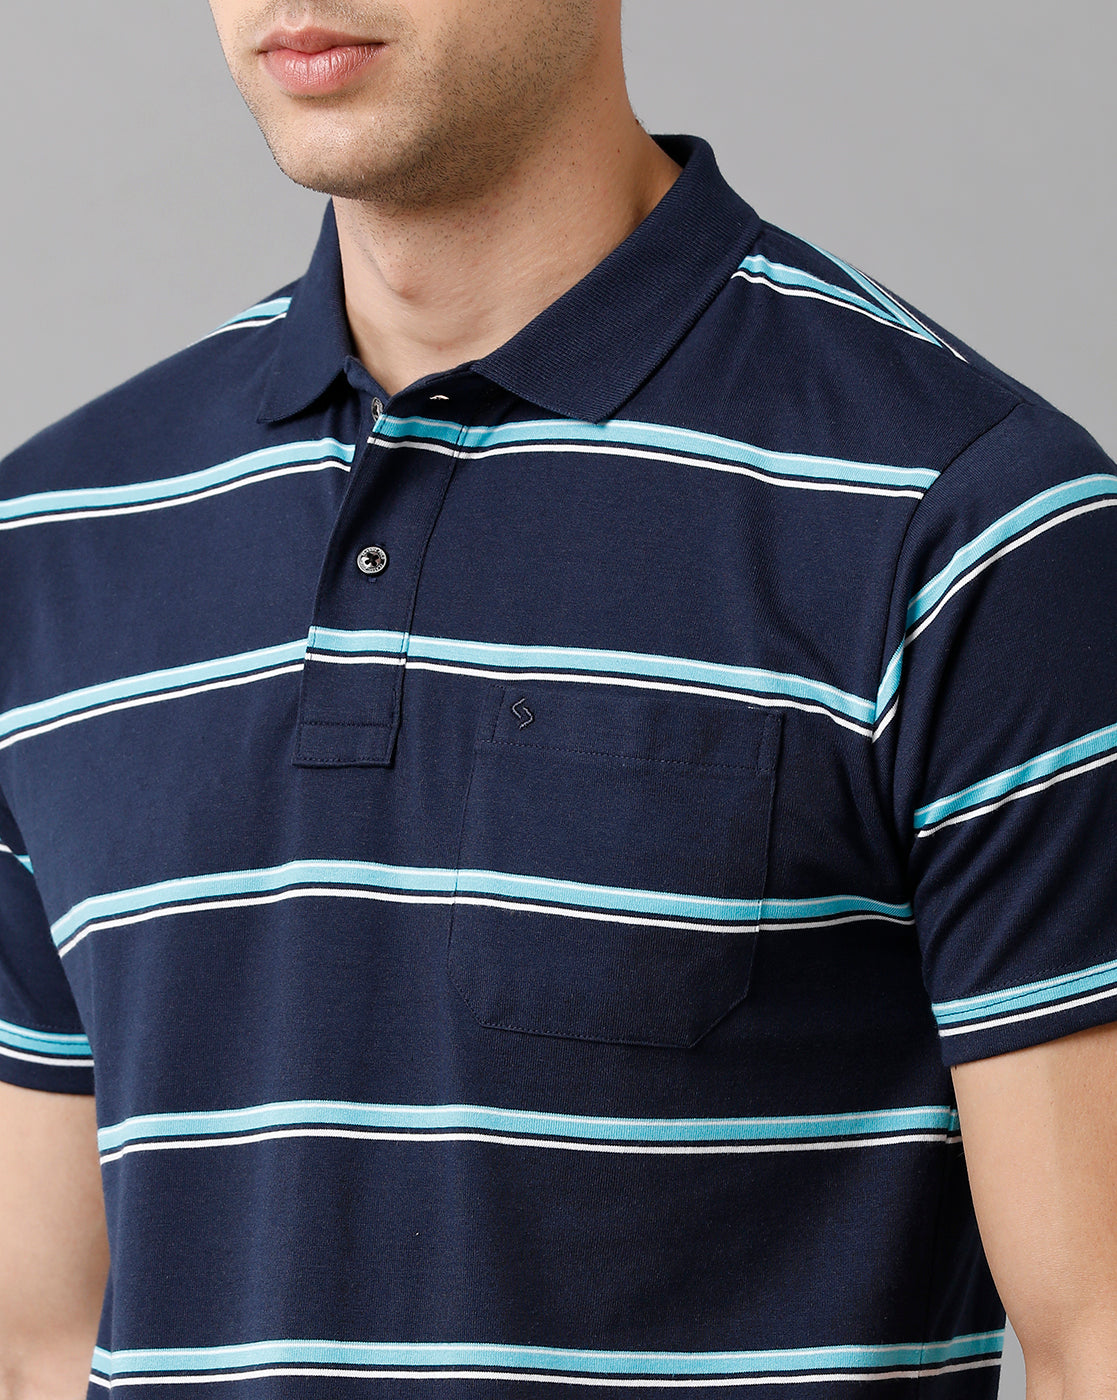 Classic Polo Mens Cotton Blend Striped Half Sleeve Authentic Fit Polo Neck Navy Blue Color T-Shirt | Avon 502 A